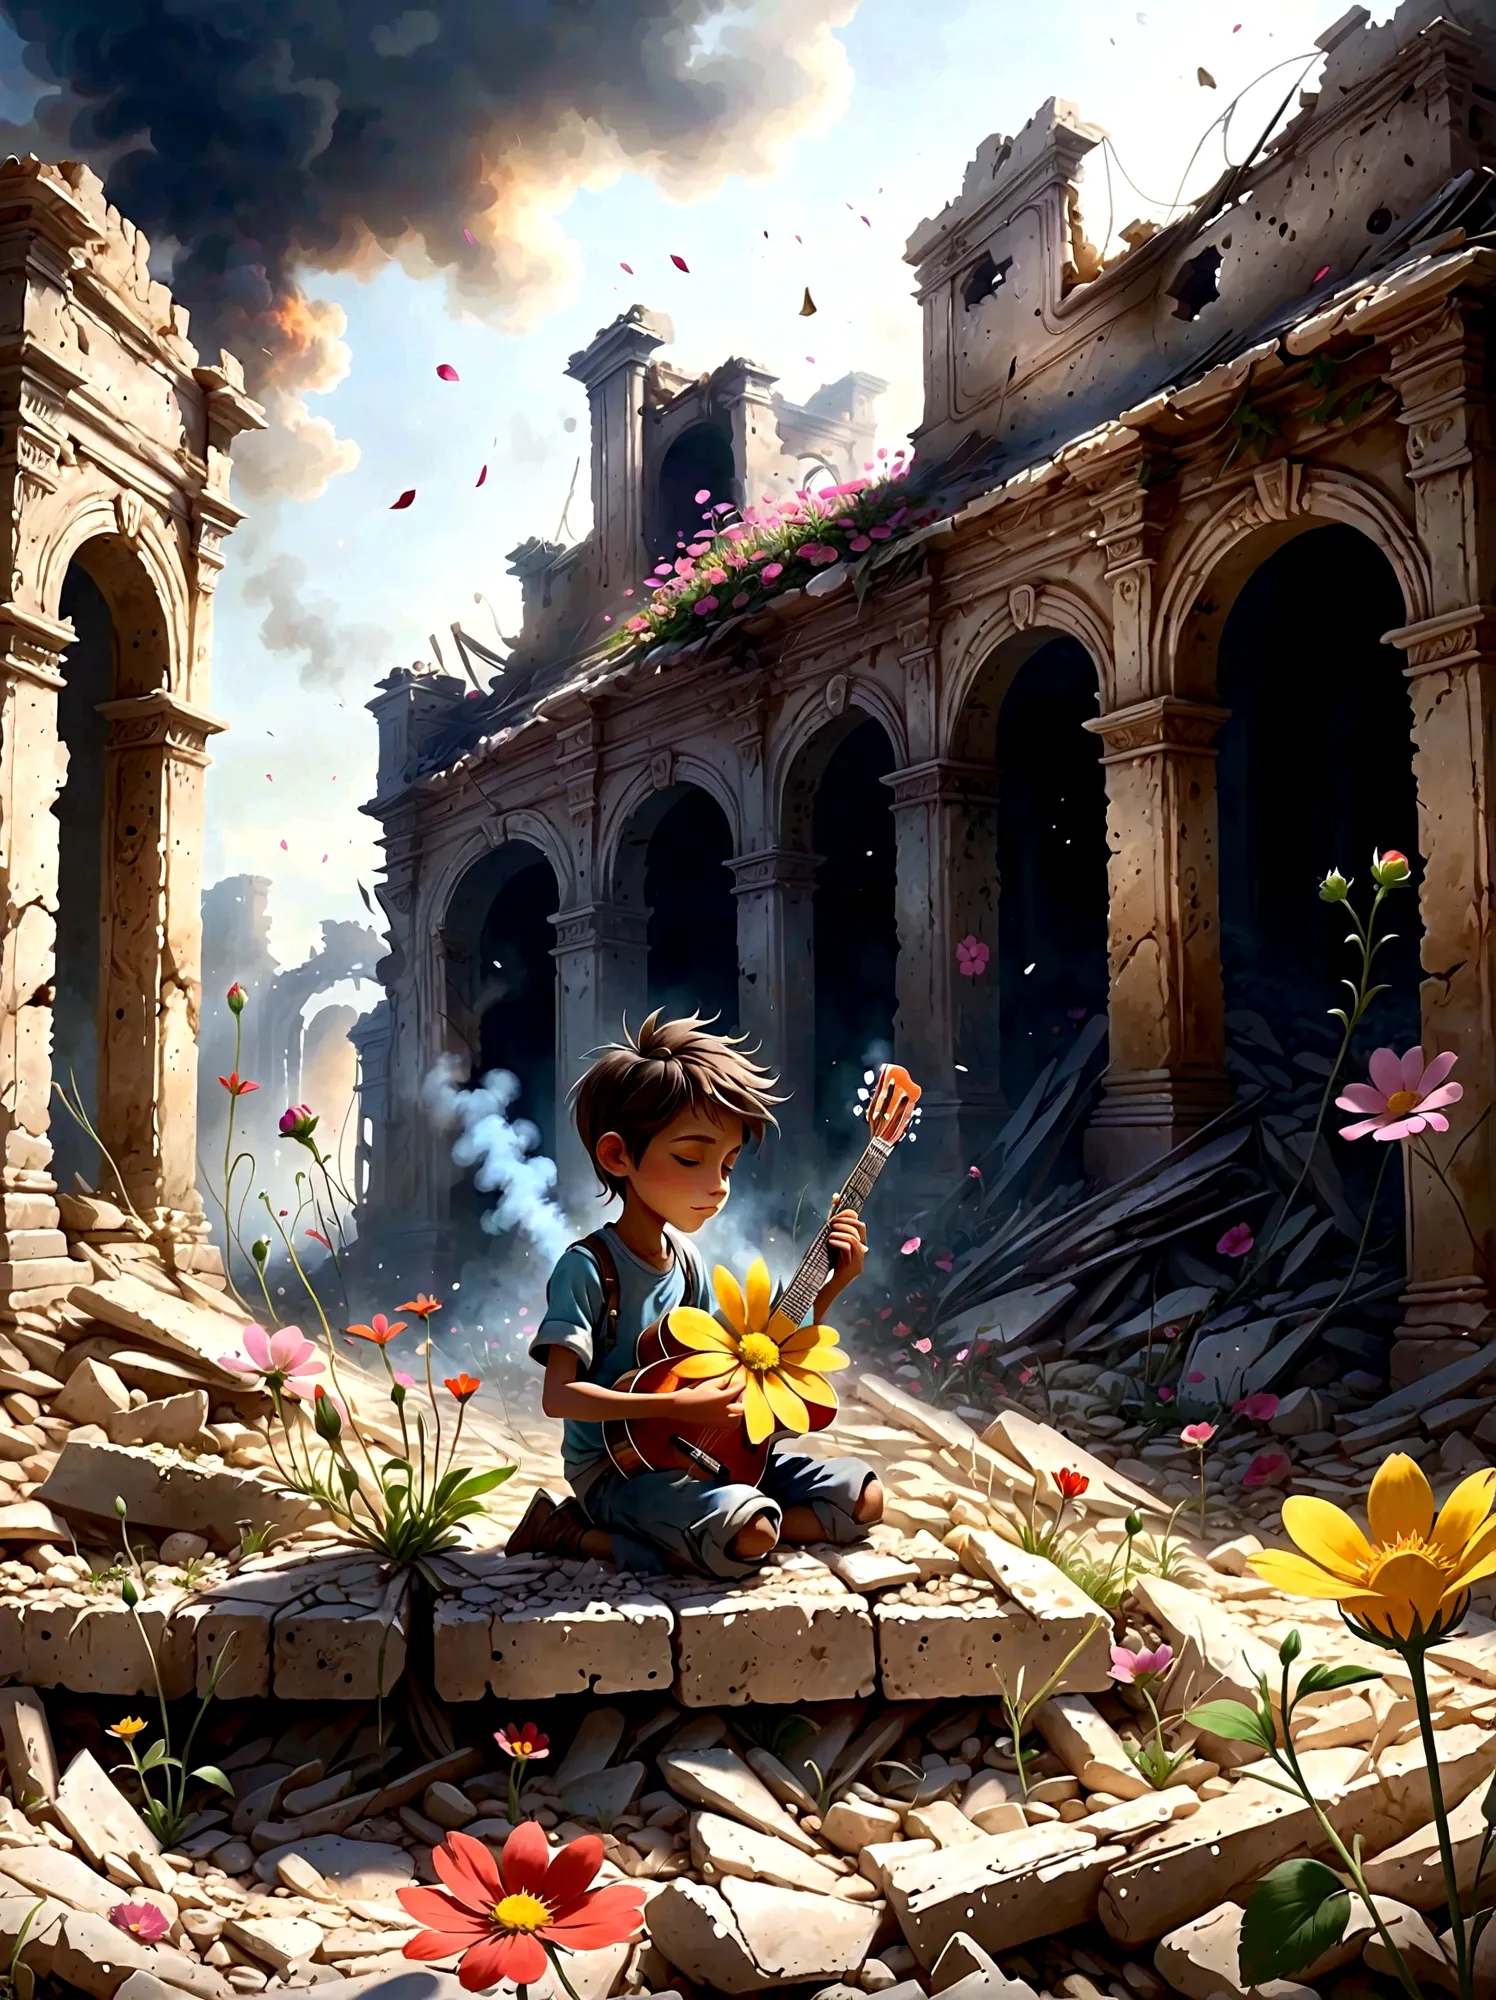 In the midst of a war-torn, smoky ruin, a child is playing a guitar. The scene captures the stark contrast between the devastati...